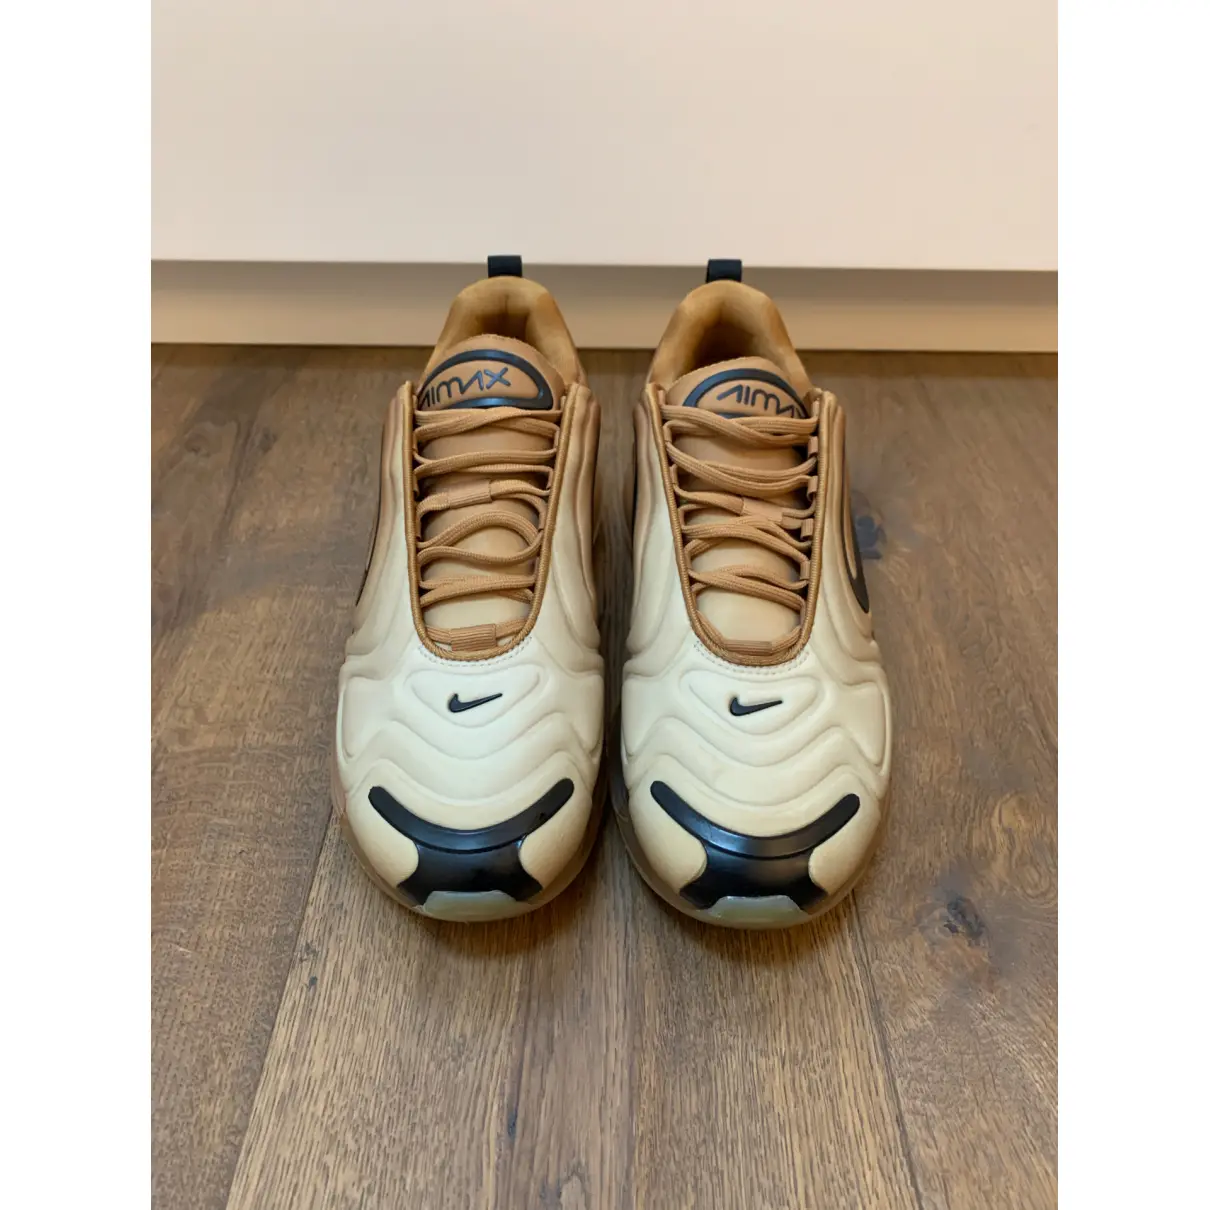 Buy Nike Air Max 720 cloth low trainers online